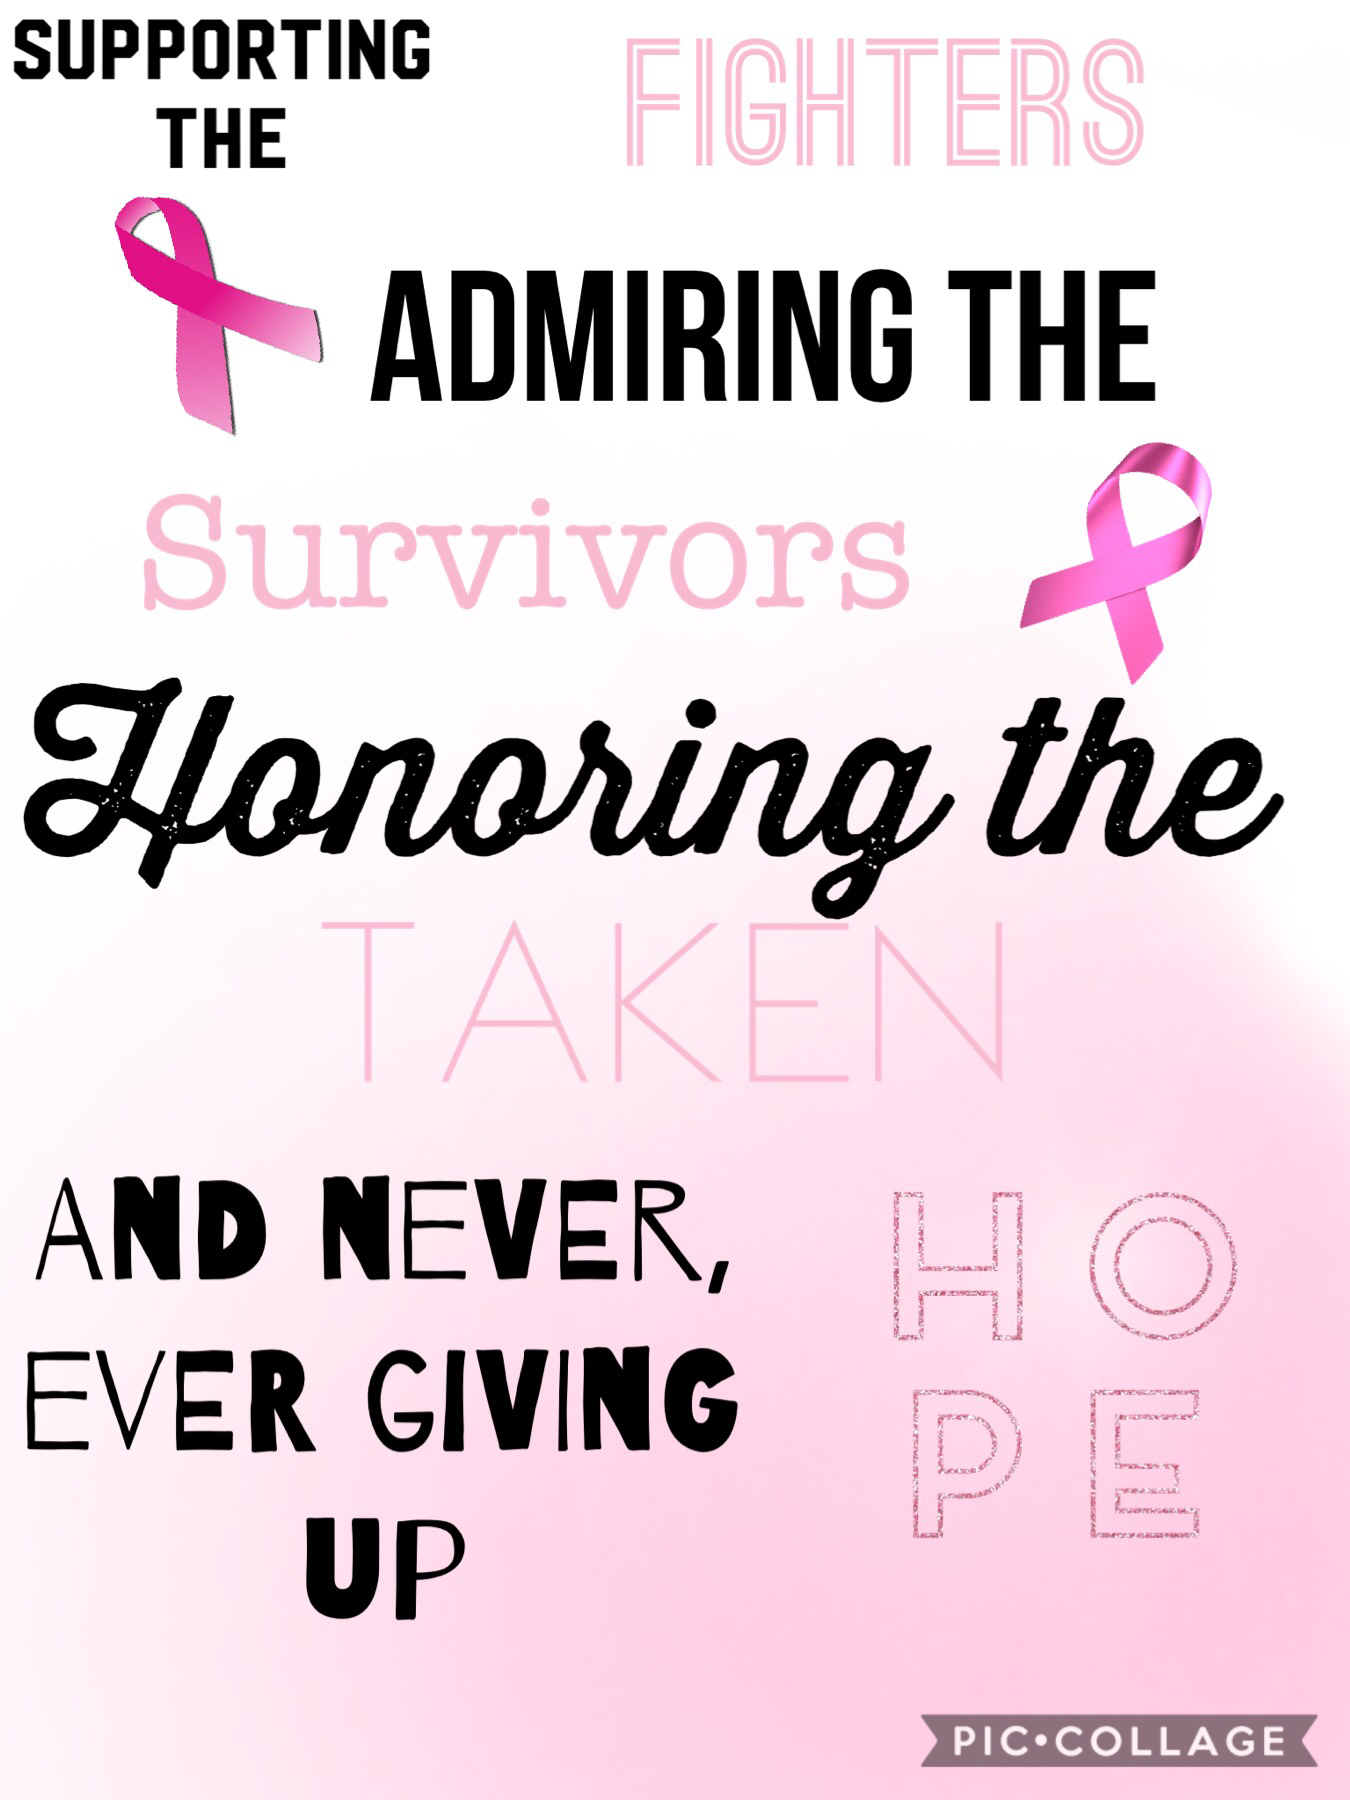 Hey guys! I made this for my aunt, who is almost done with chemo therapy, and desperately needs prayer. She is going through rough times with her breast cancer, and she has a husband and a 7 year old child. Please pray for her 💗